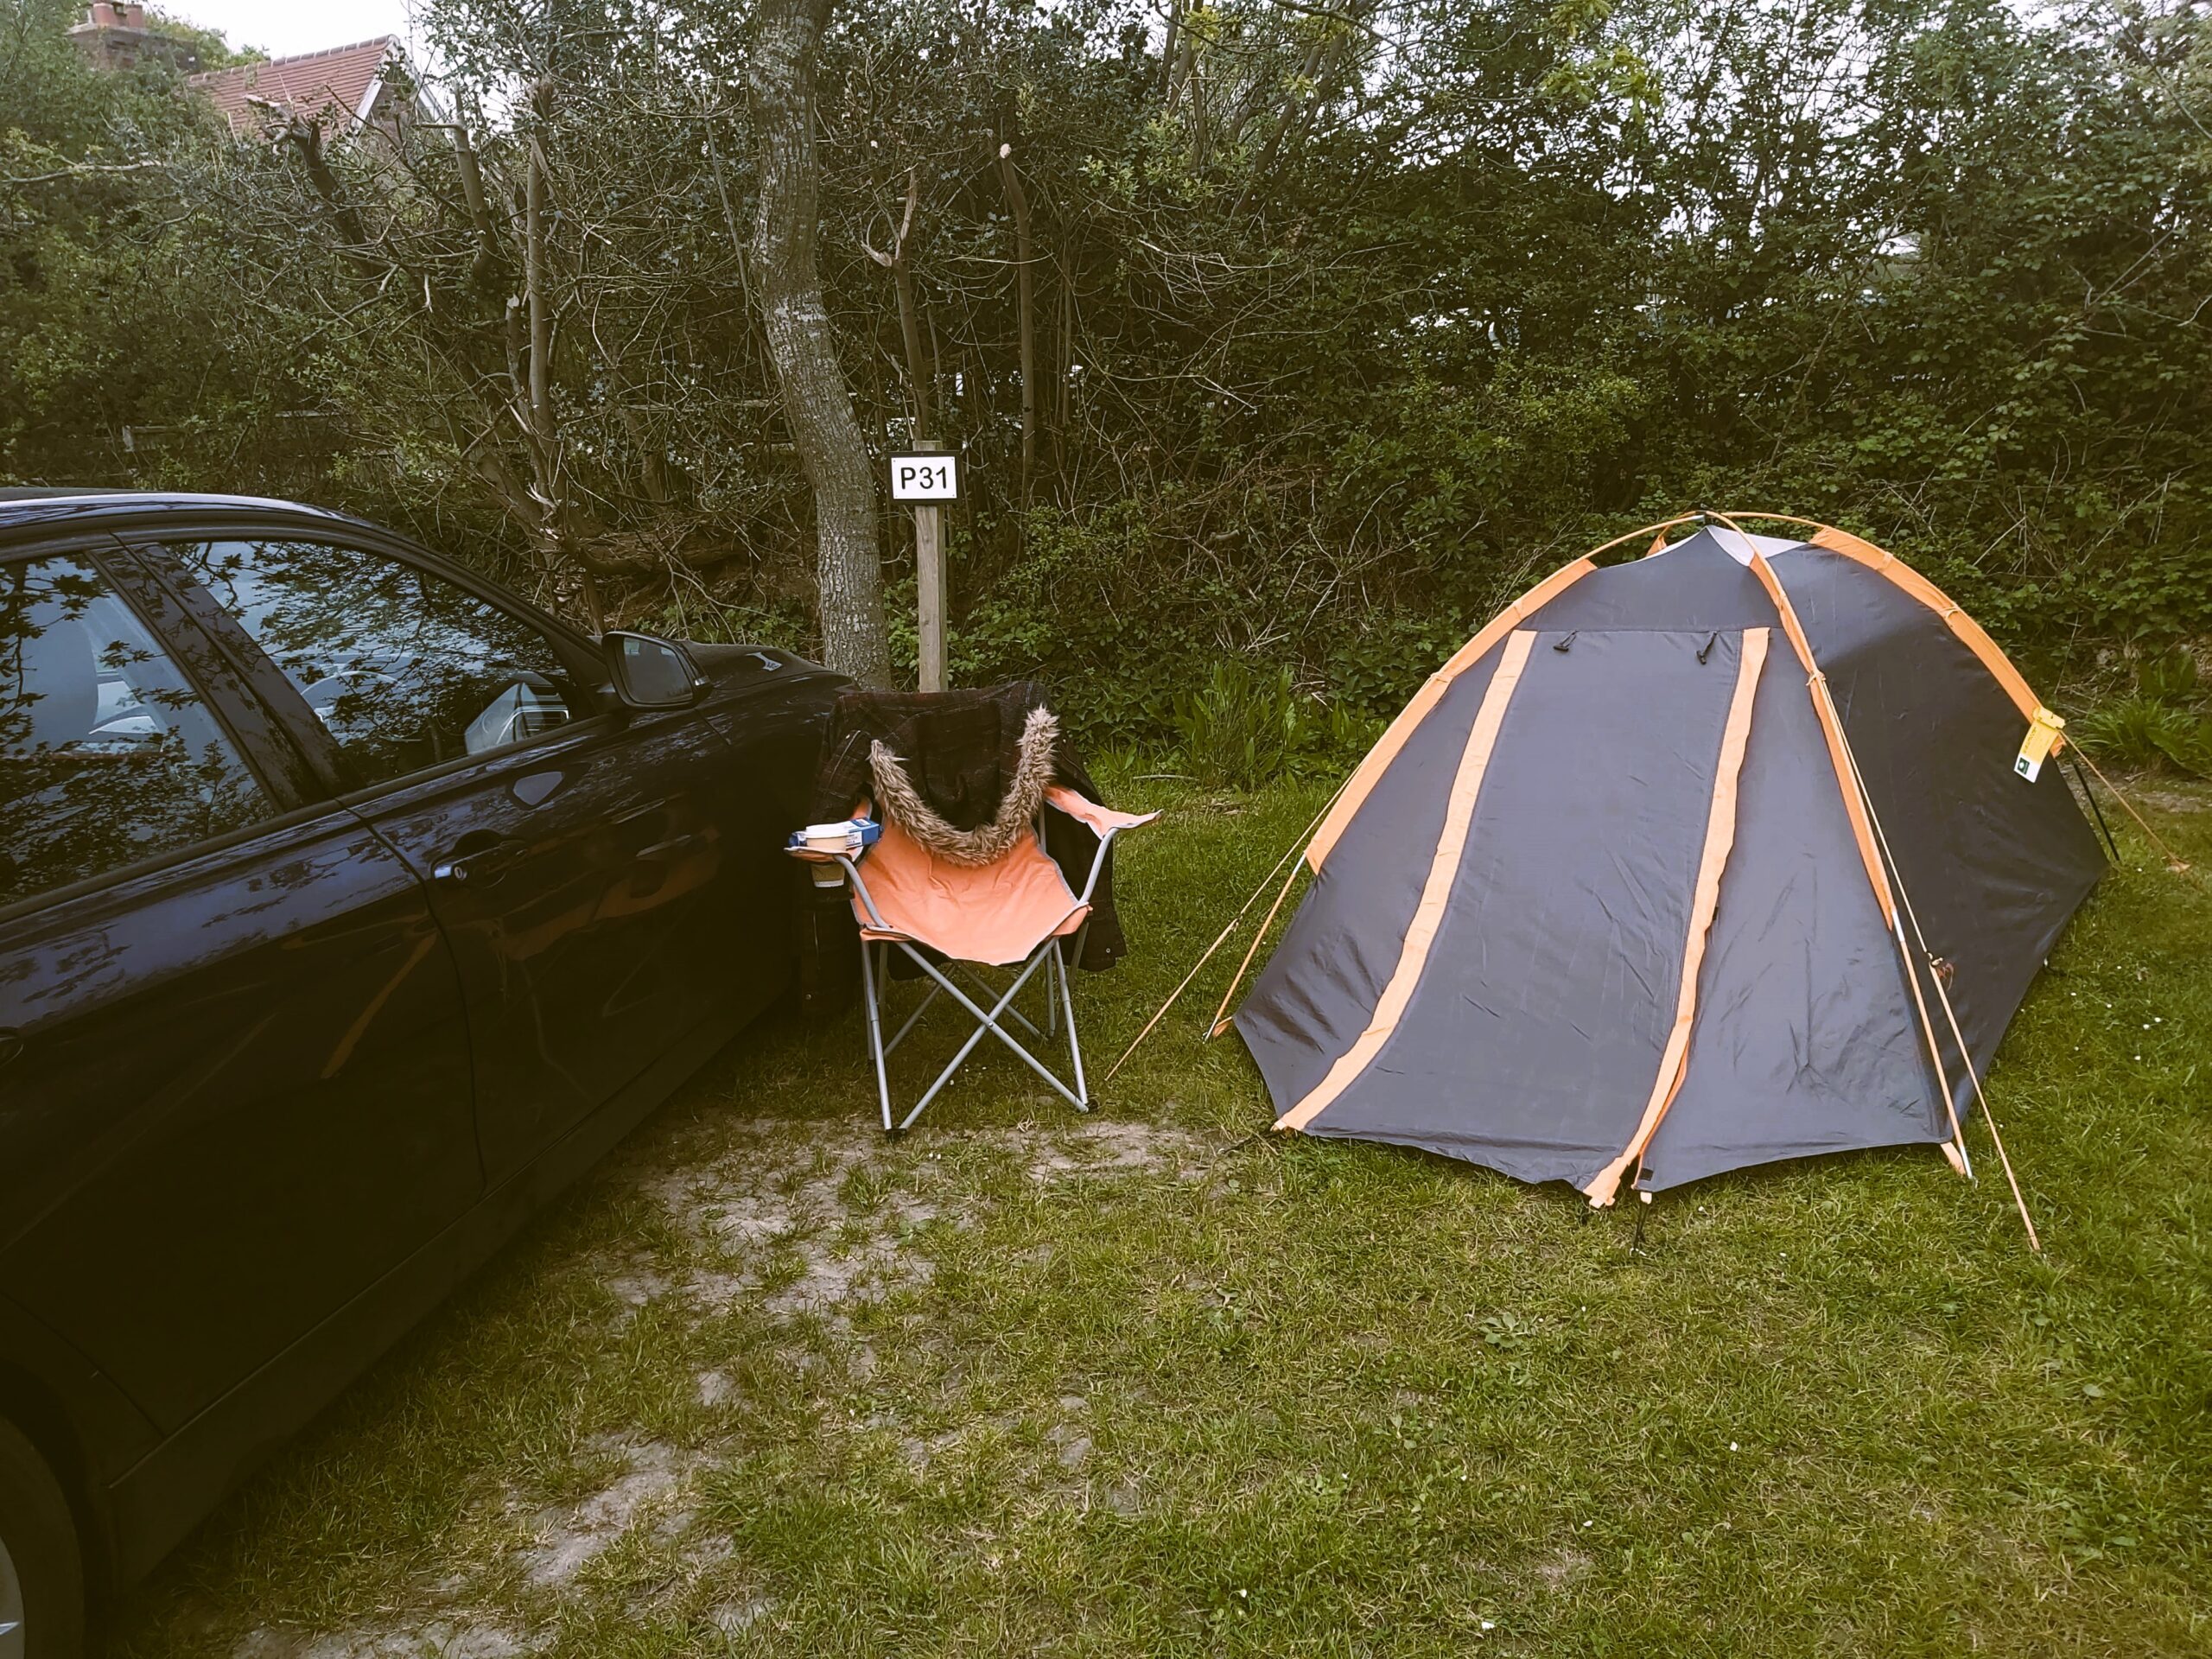 Car, tent and chair at a pitch on Norden Farm campsite, Dorset, England